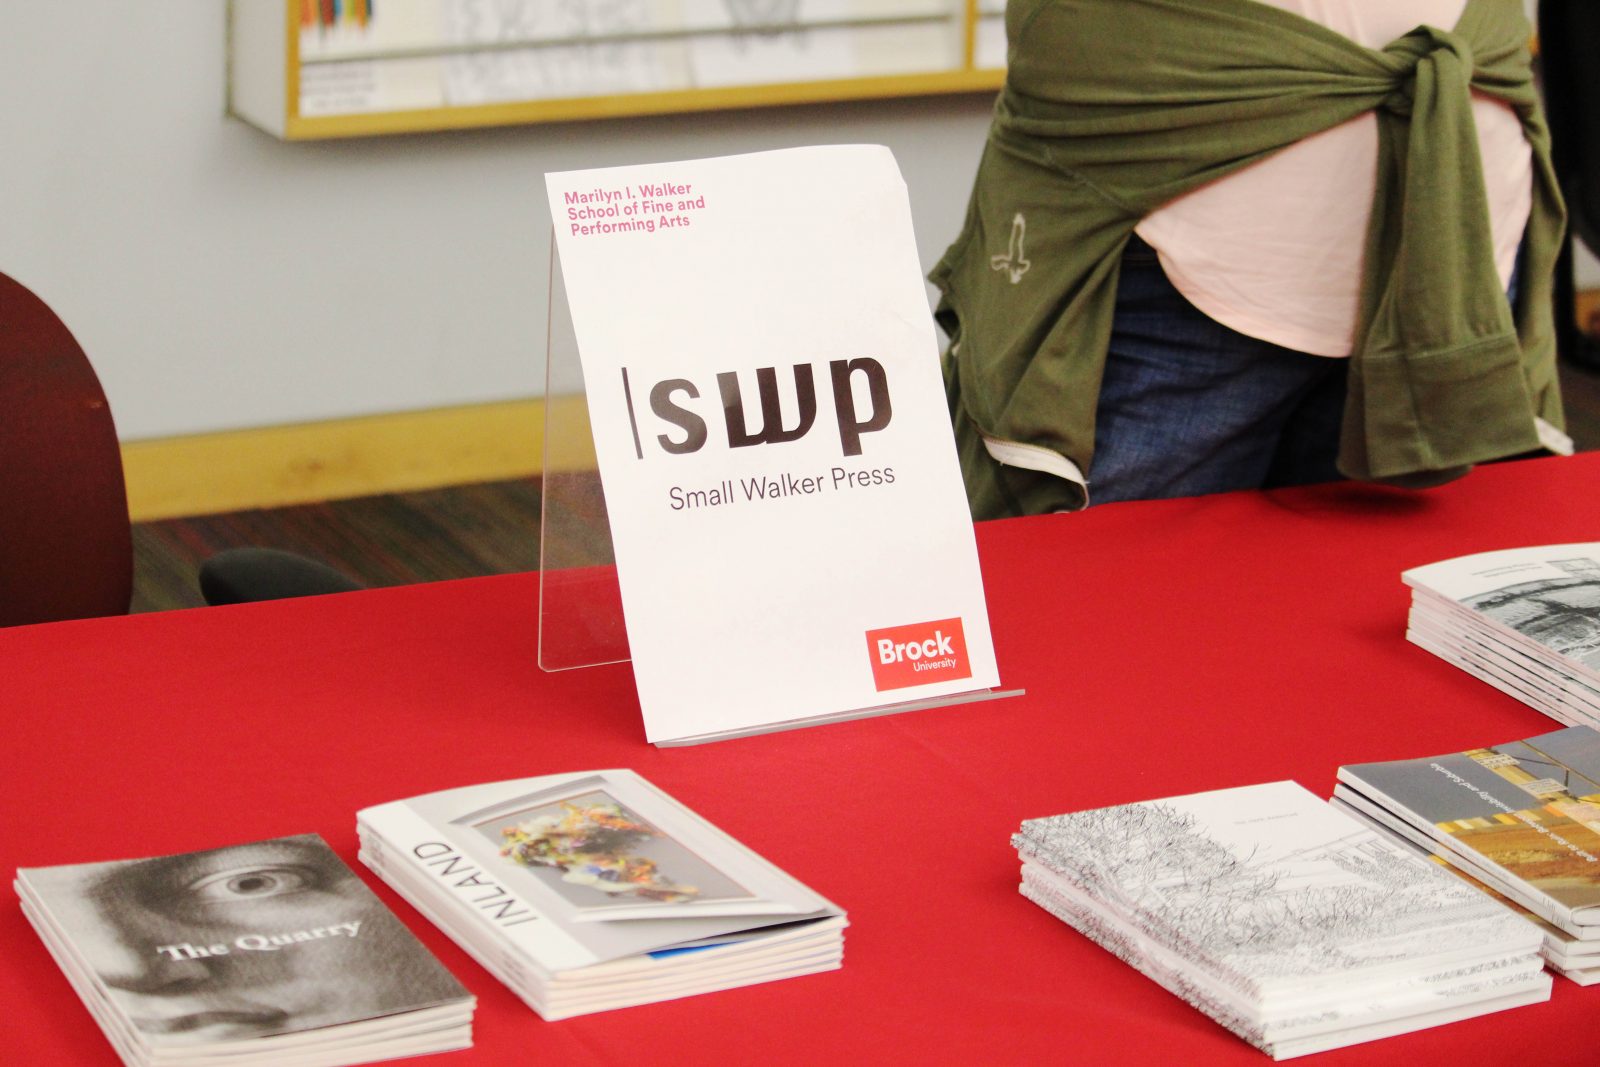 A tabletop banner reads “SWP Small Walker Press” set atop a red table cloth with a collection of books and publications.